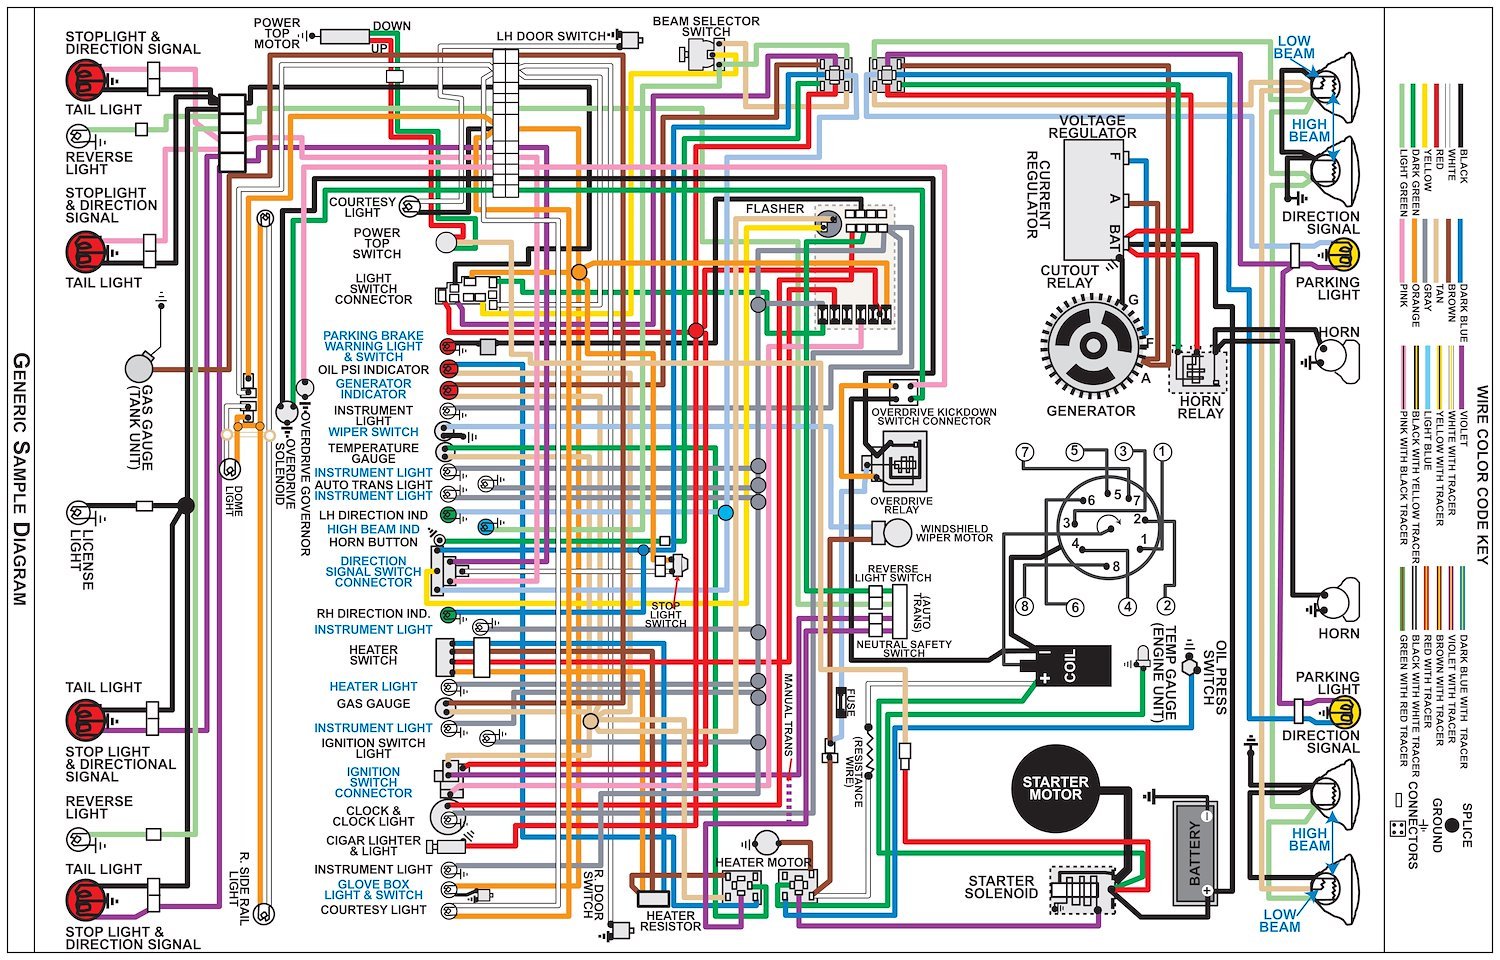 Wiring Diagram for 1970 Dodge Charger, 11 in x 17 in., Laminated